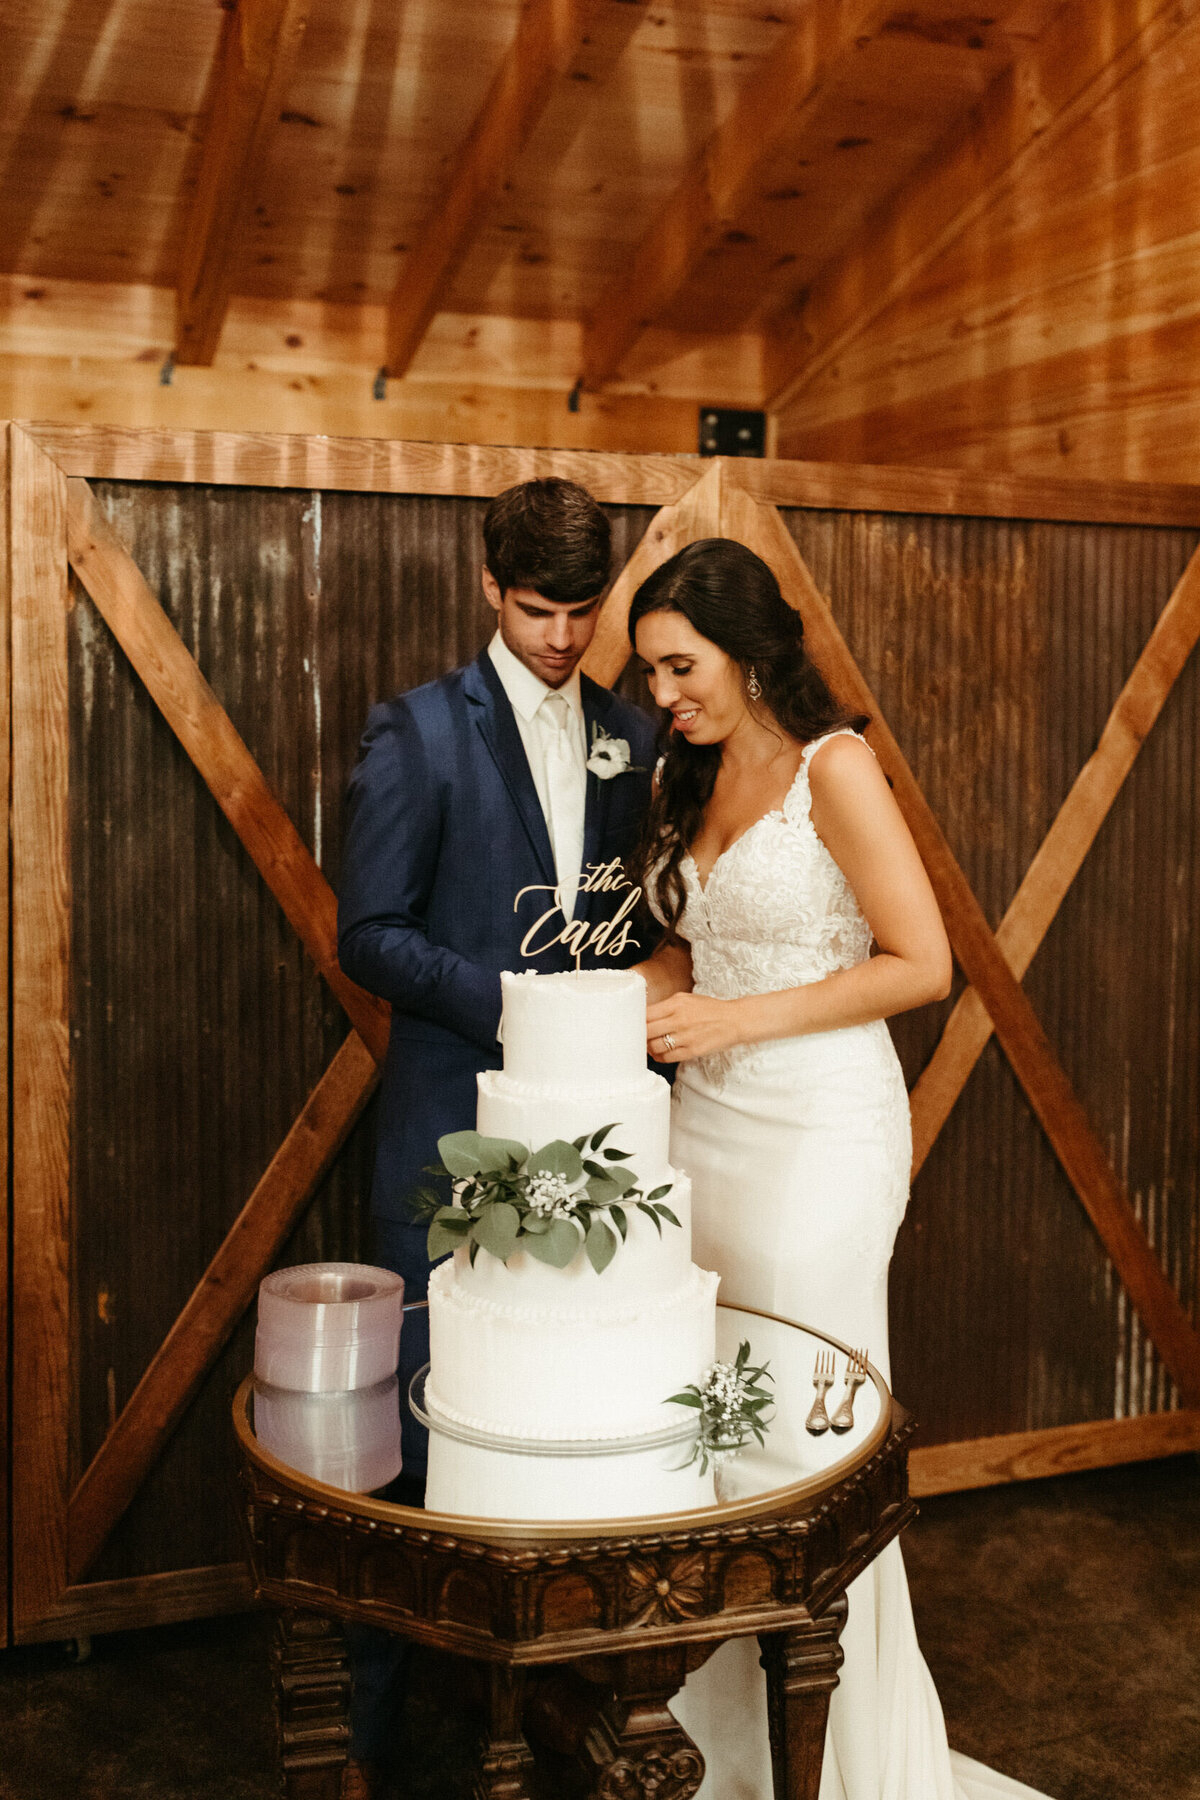 north-mississippi-wedding-bride-and-groom-cutting-cake-2